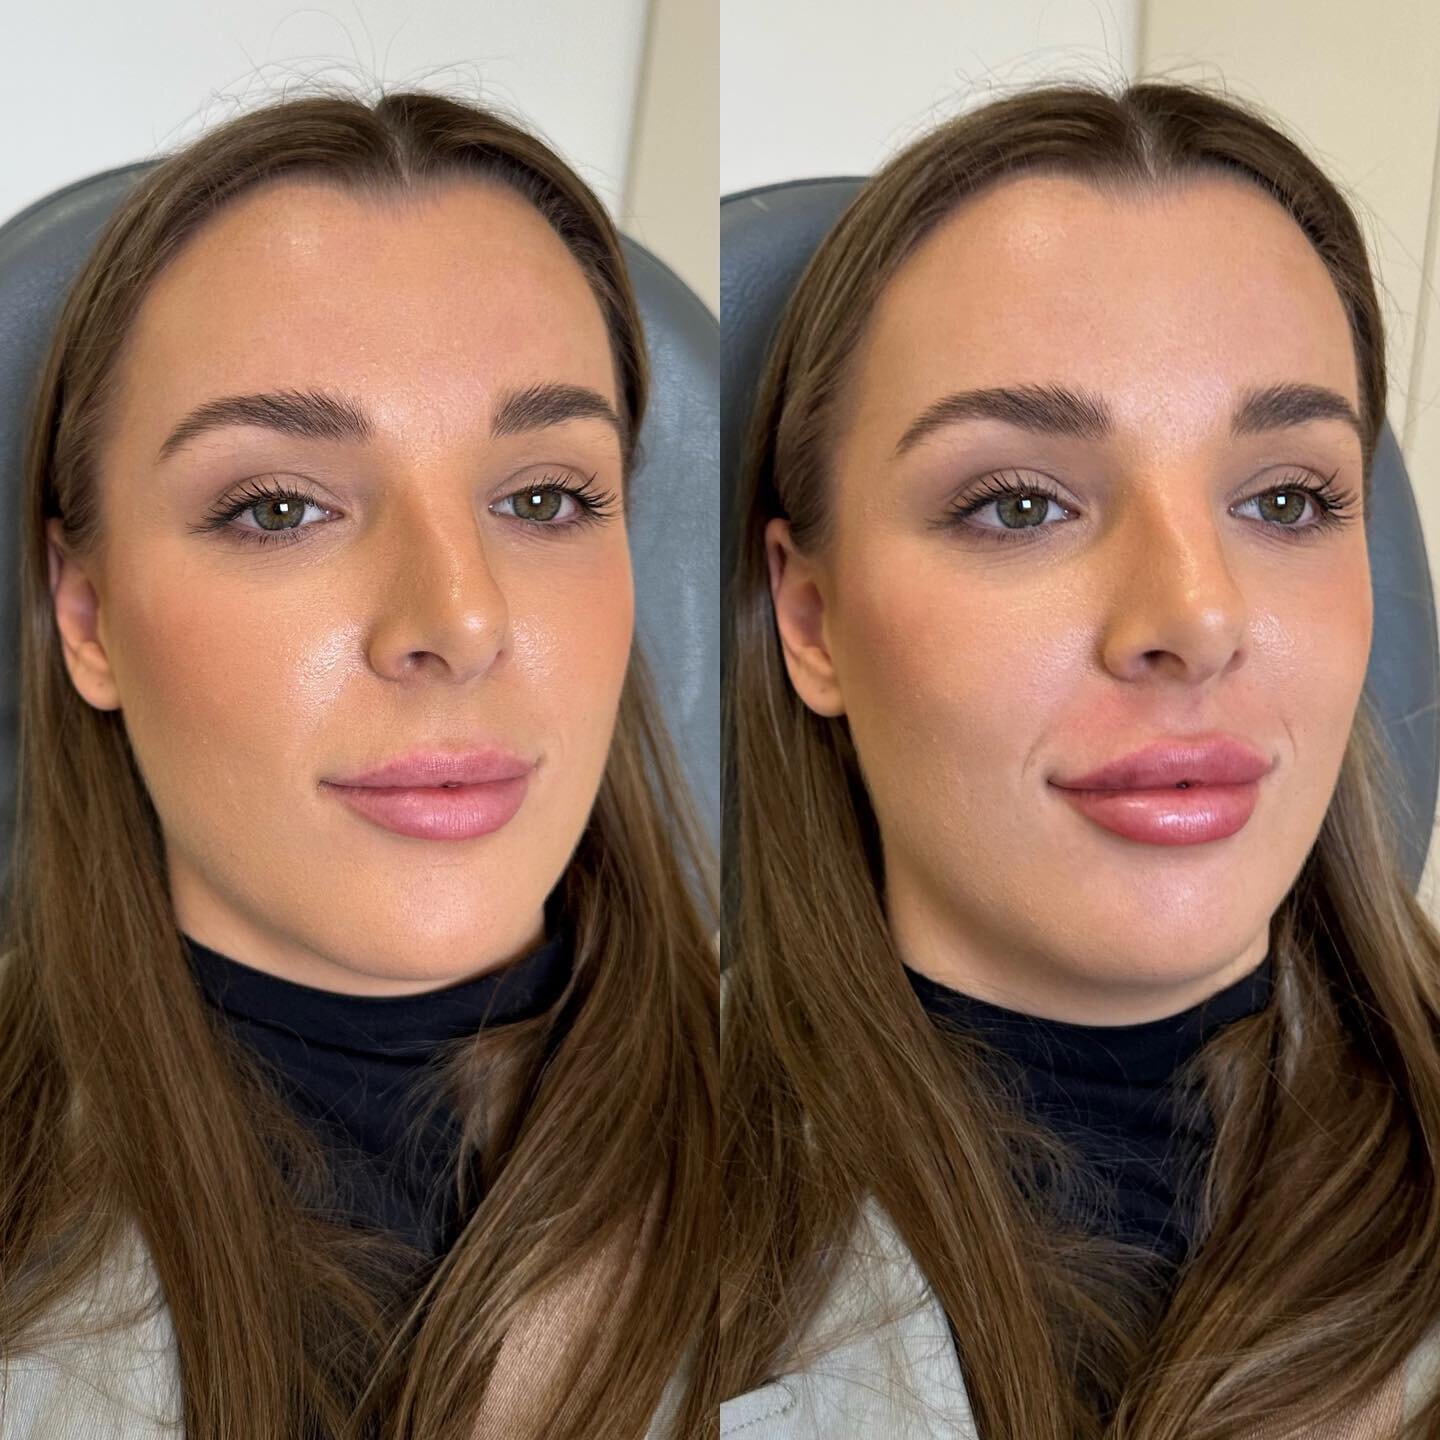 Picture perfect✨🤎

If you&rsquo;re looking for a sign to get lip filler, this is it 😂 

Photos immediately before and after treatment. Swelling and bruising will last 3-4 days.